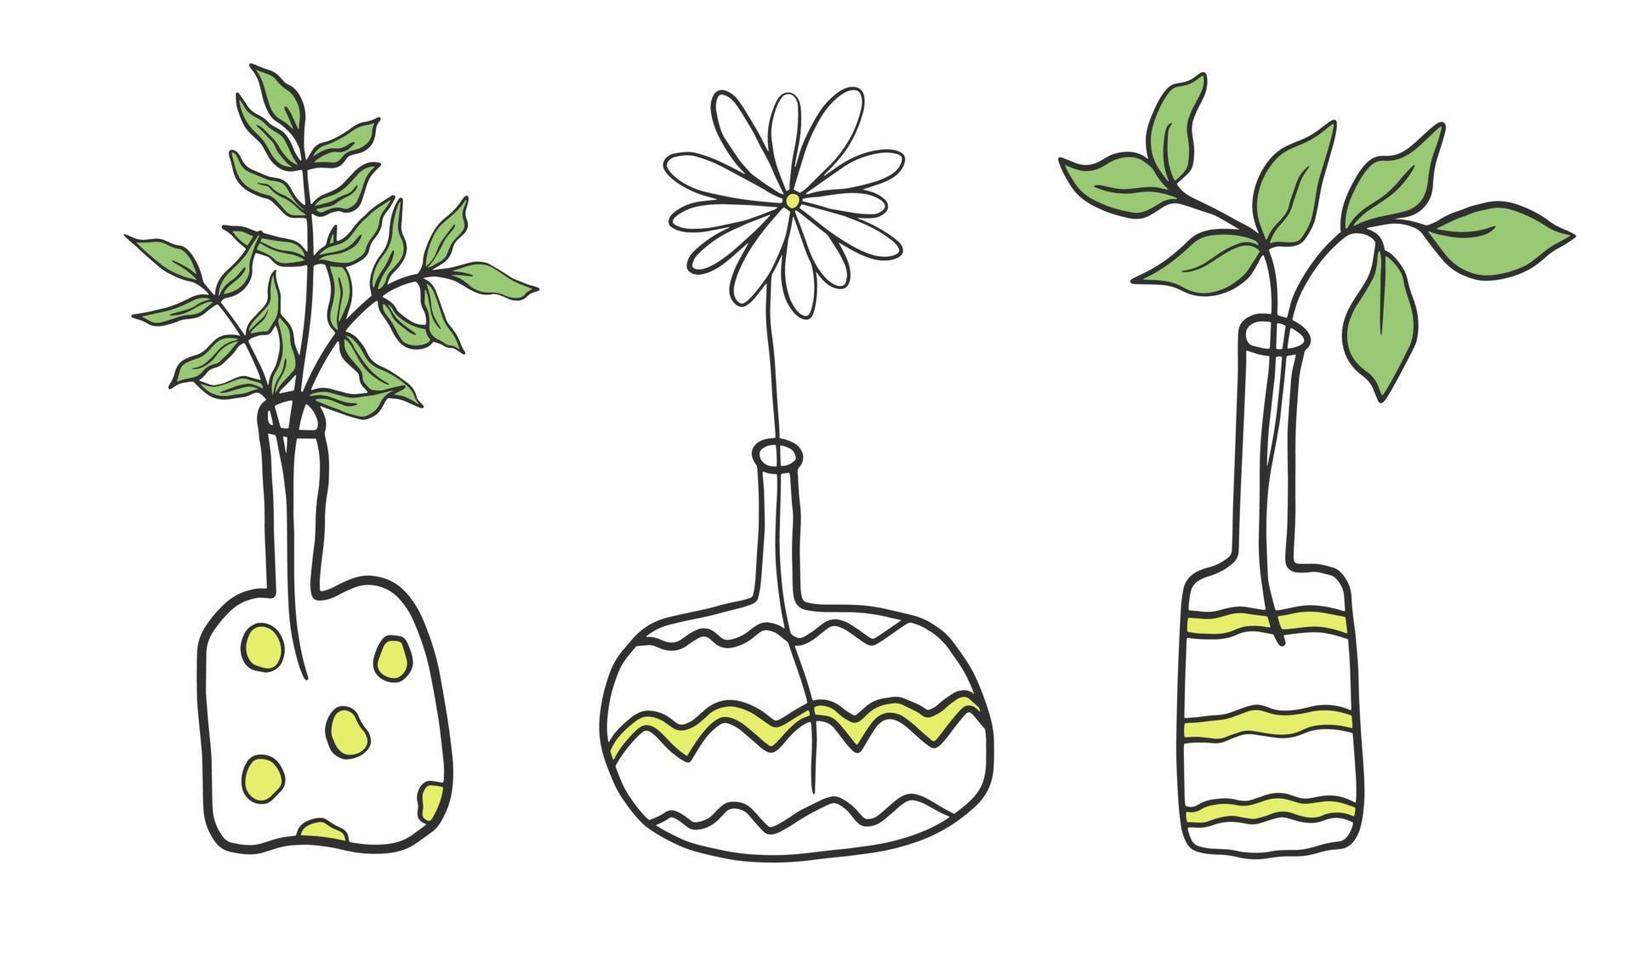 Vases with flowers and leafy branches doodle style vector